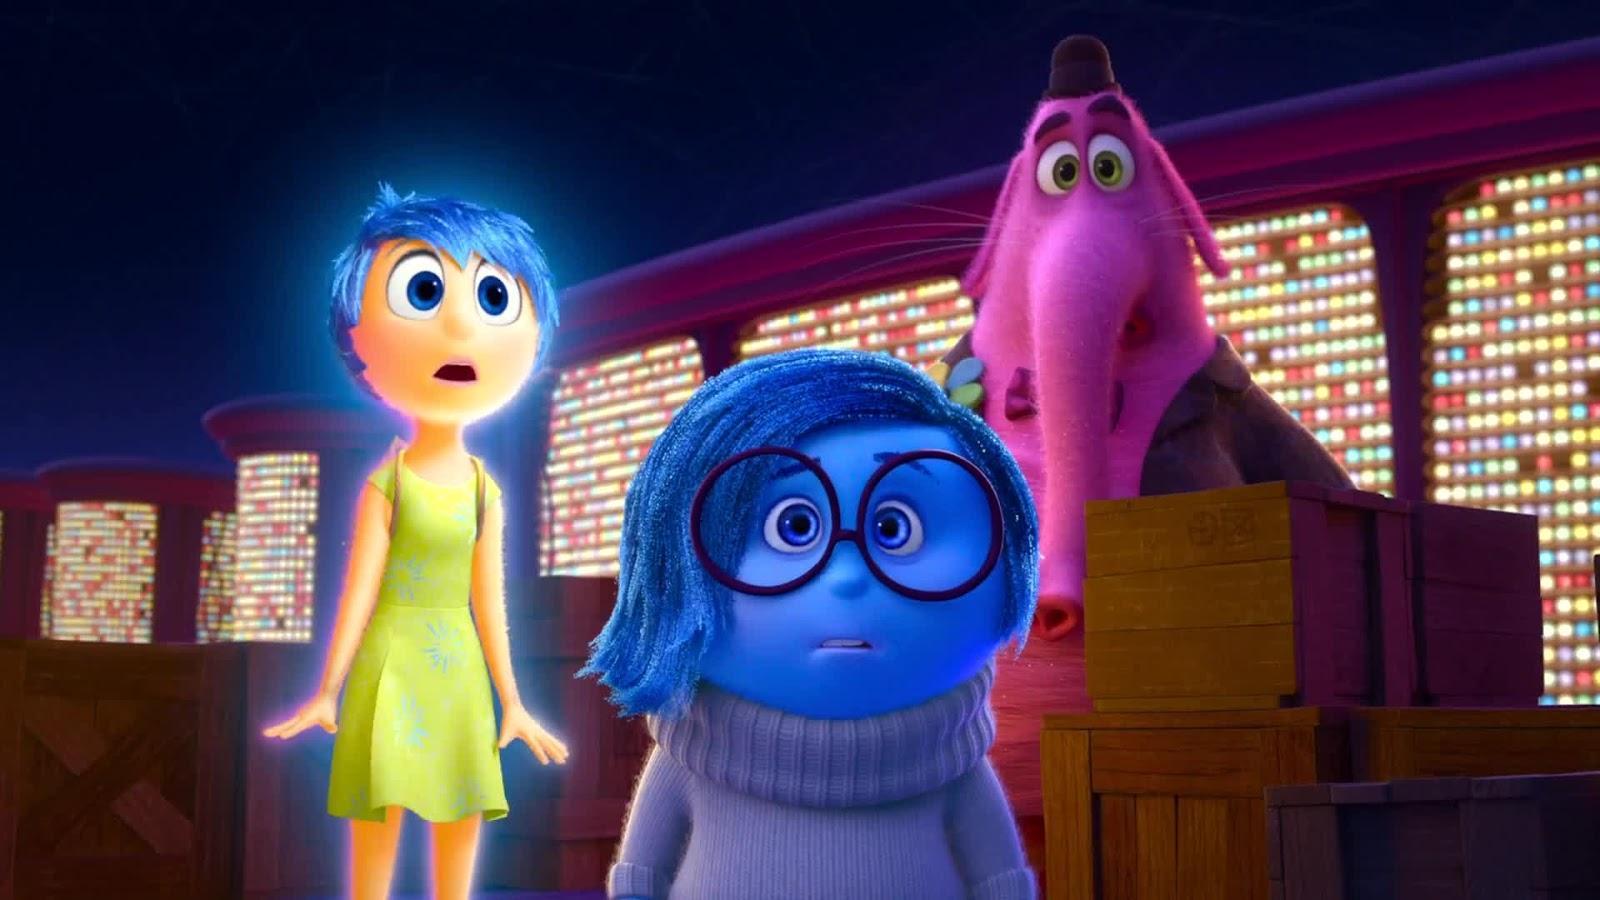 Inside Out (2015 film) - Wikipedia